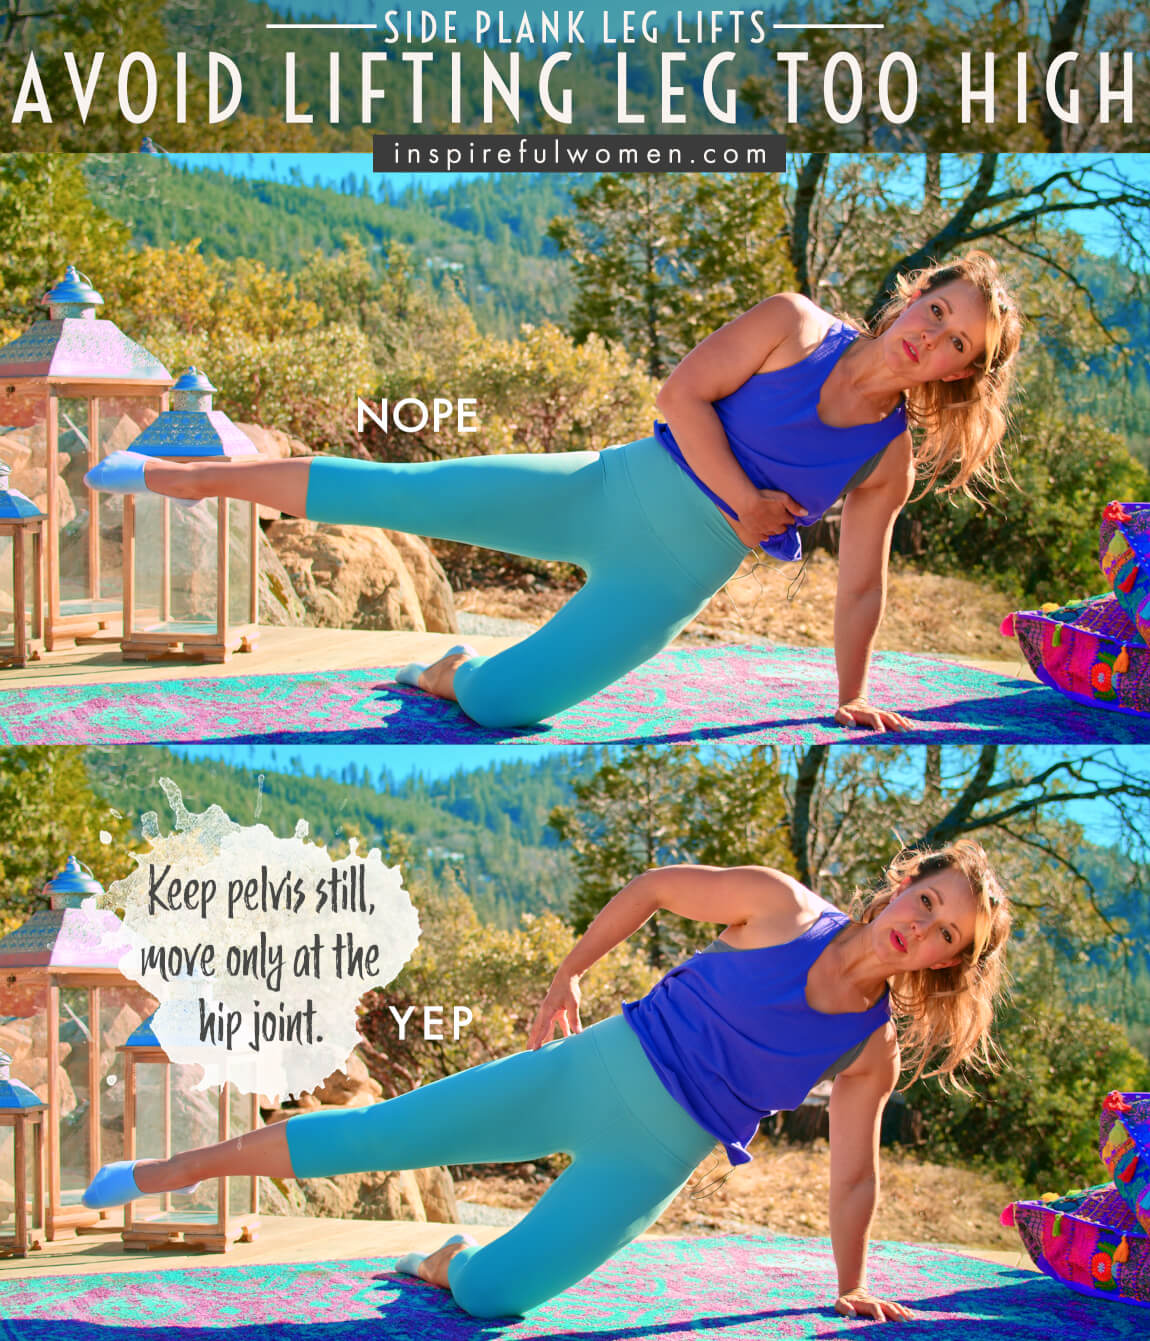 avoid-lifting-leg-too-high-side-plank-leg-lifts-glute-exercise-common-mistakes